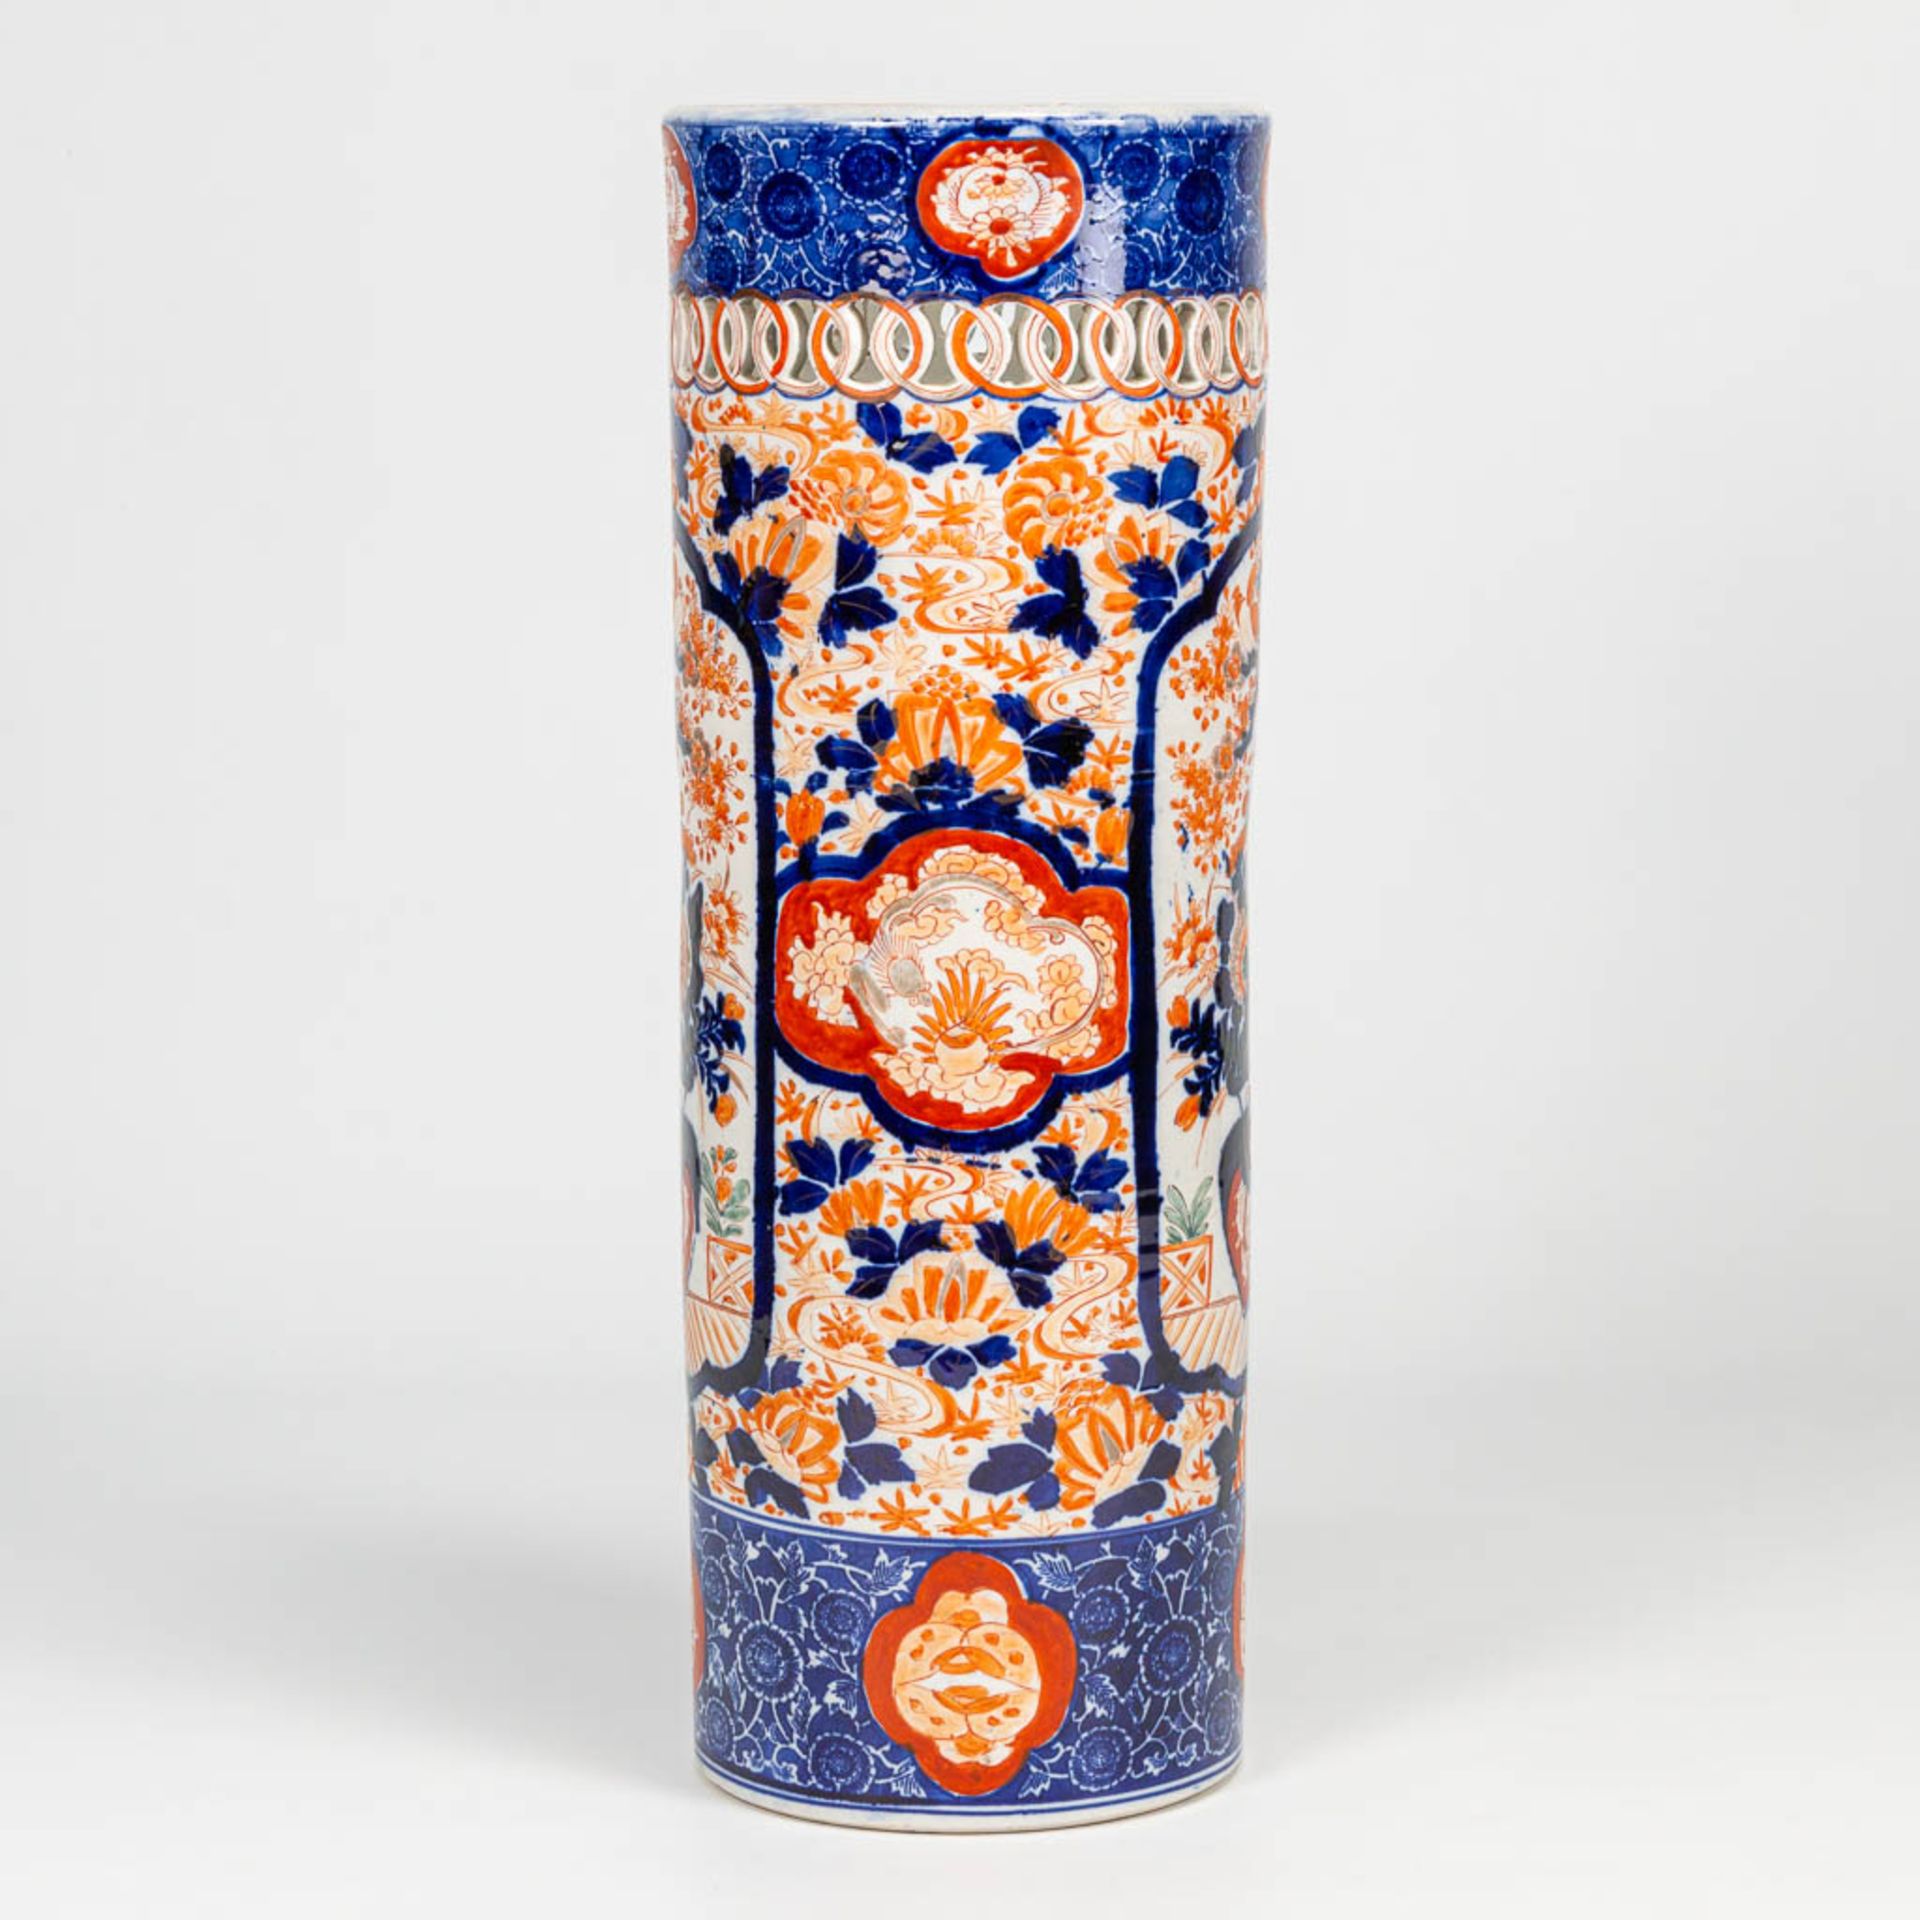 An Imari umbrella stand, vase made of porcelain in Japan. 19th/20th century. (61 x 22 cm) - Image 5 of 17